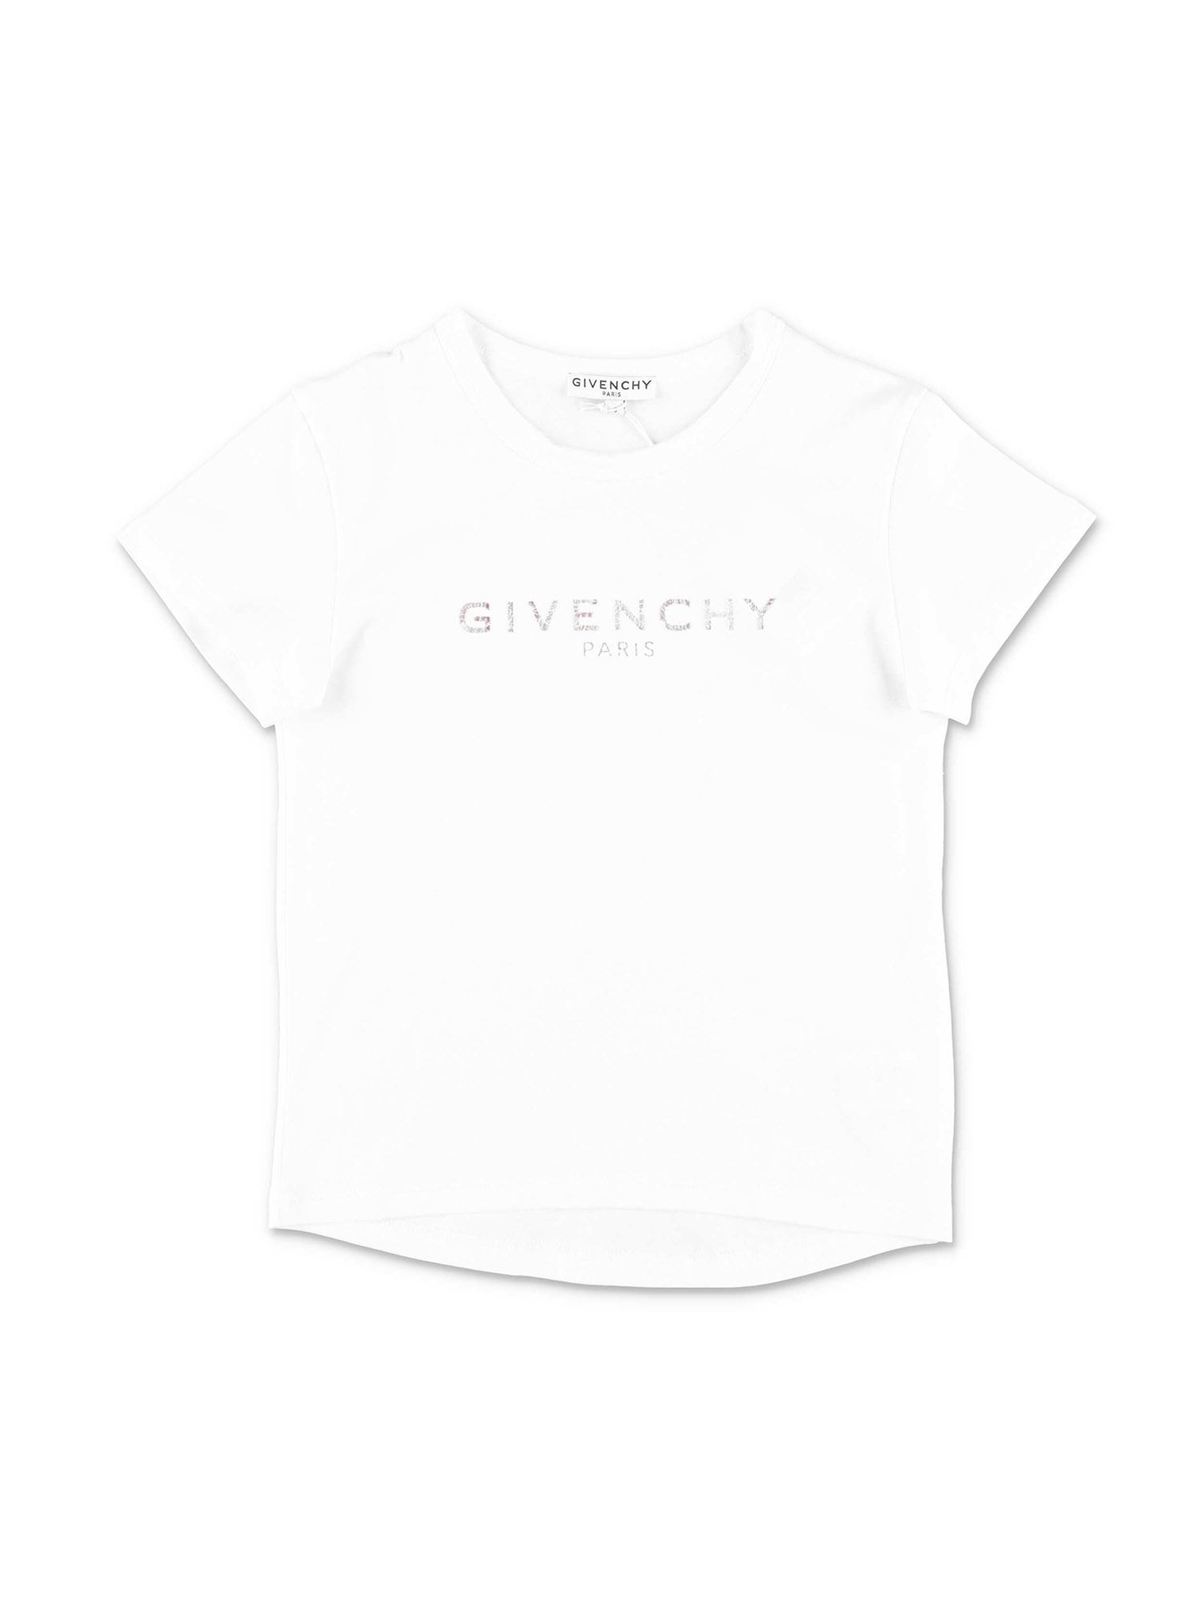 GIVENCHY WHITE T-SHIRT WITH LOGO